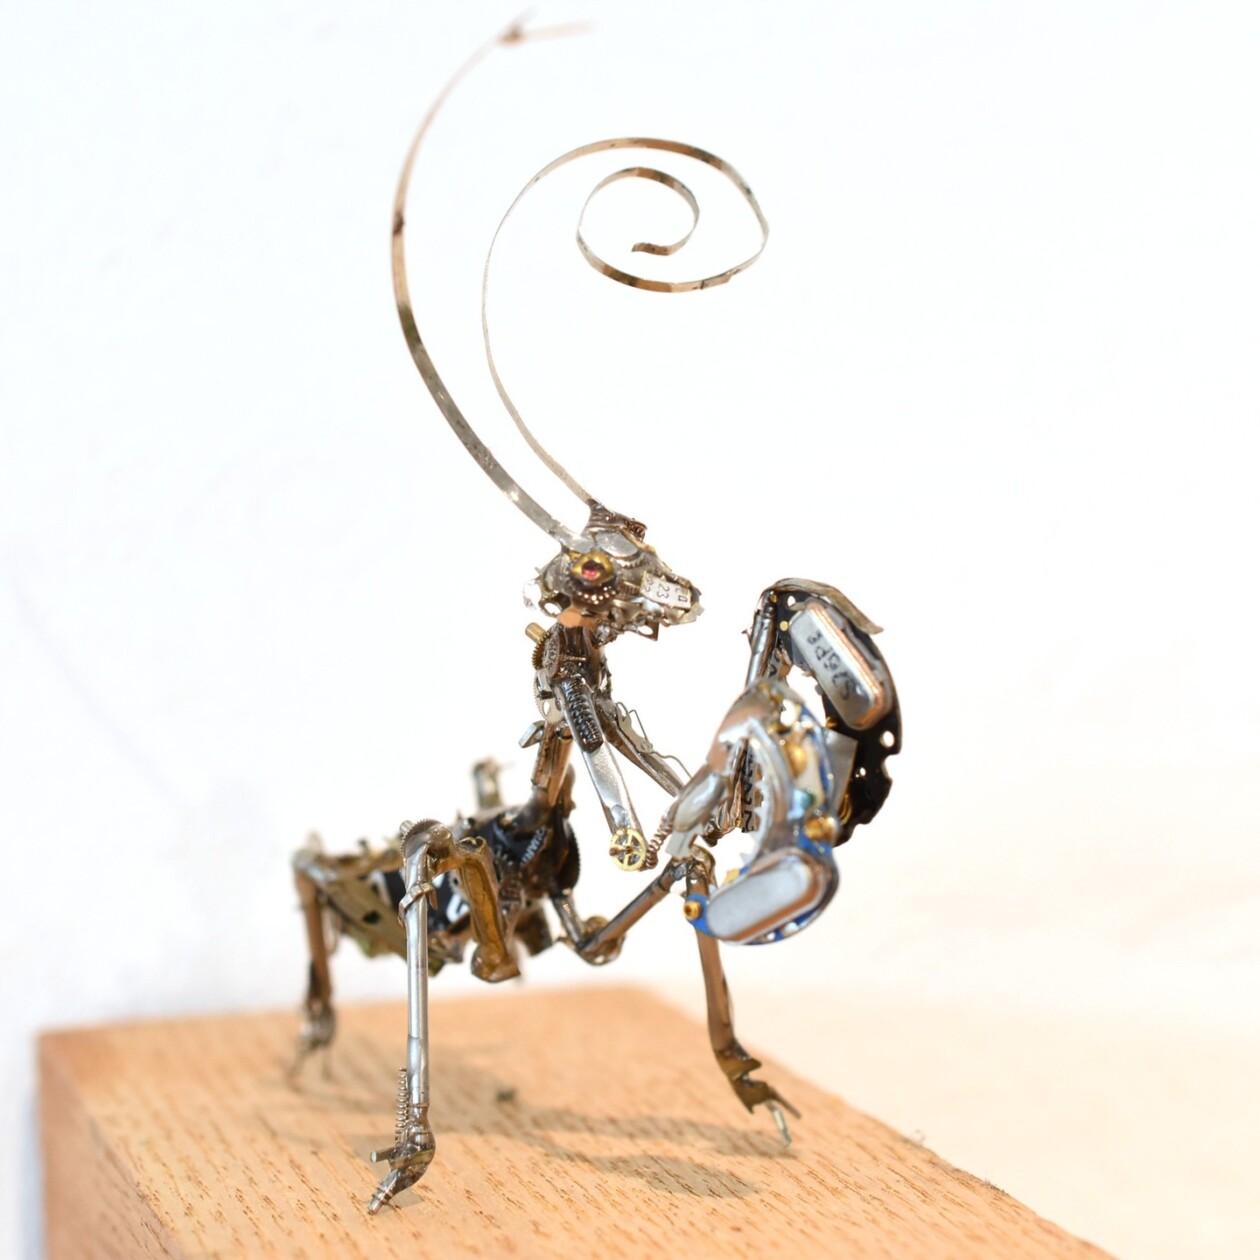 Spare Parts Of Clocks And Glasses Upcycled Into Incredible Animal Sculptures By Megane Tokei Ito (10)